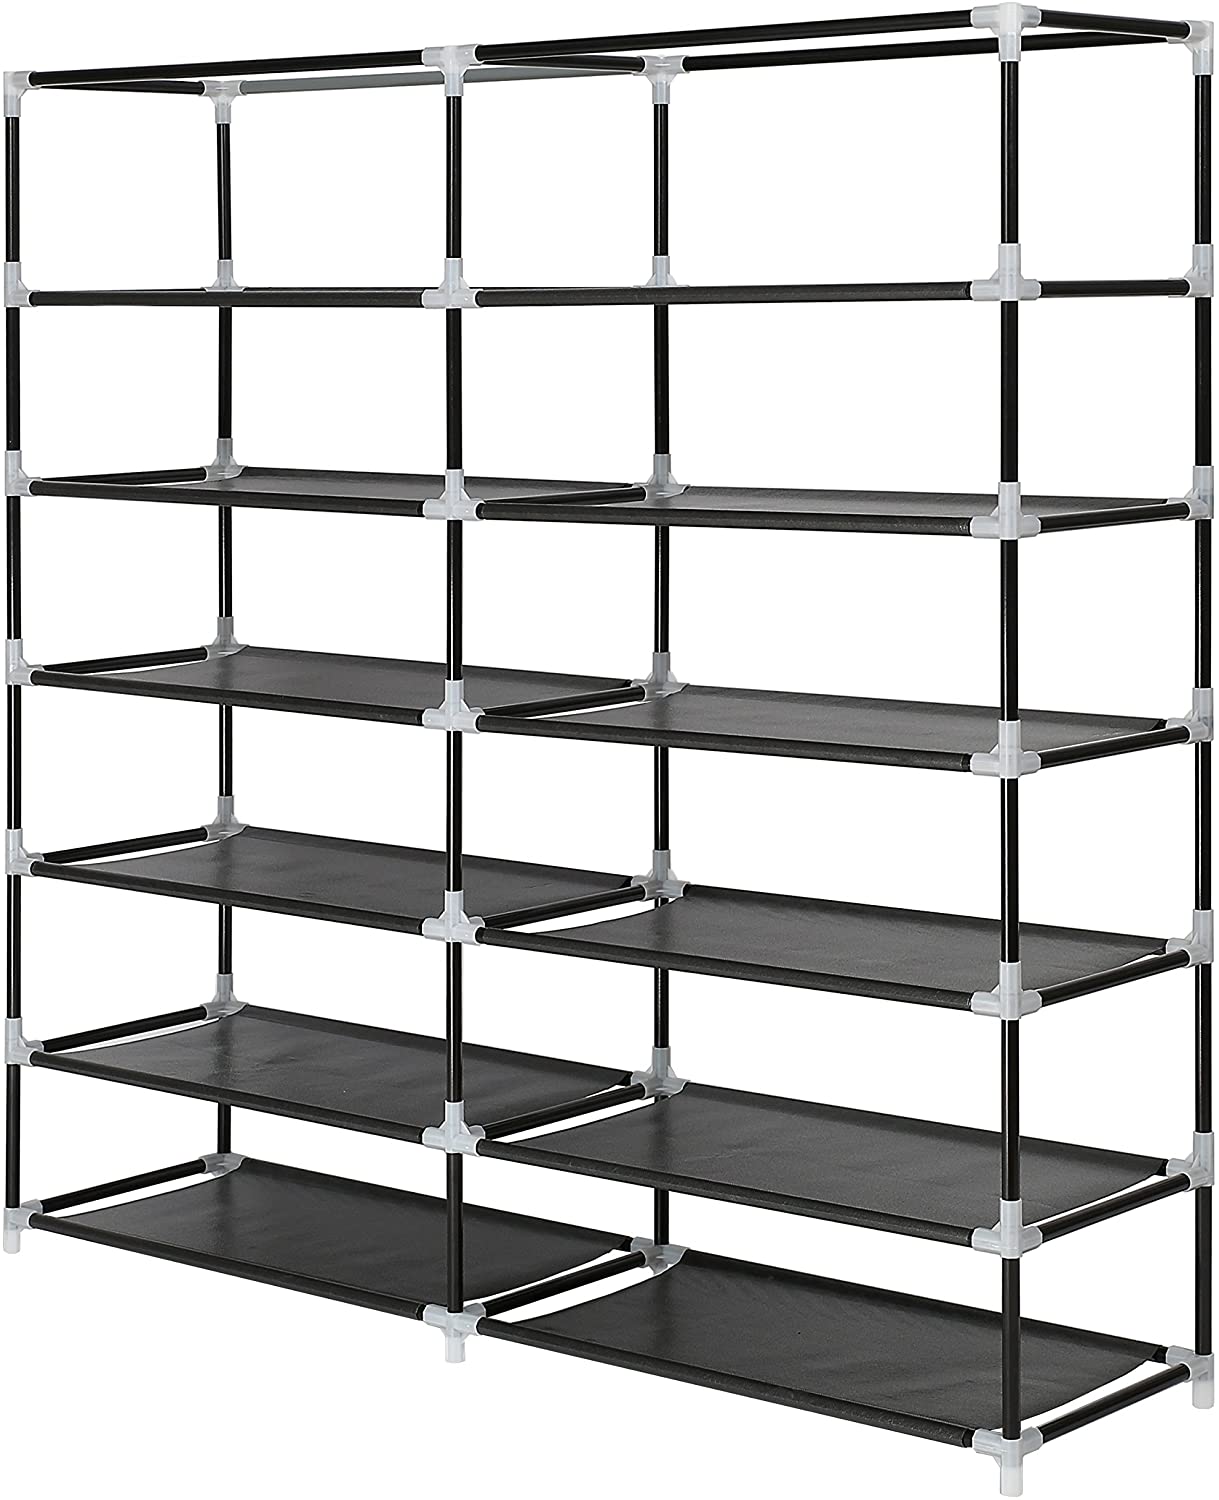 7 Tier Shoe Rack Storage Organizer, 36 Pairs Portable Double Row Shoe Rack Shelf Cabinet Tower for Closet with Nonwoven Fabric Cover, Black 